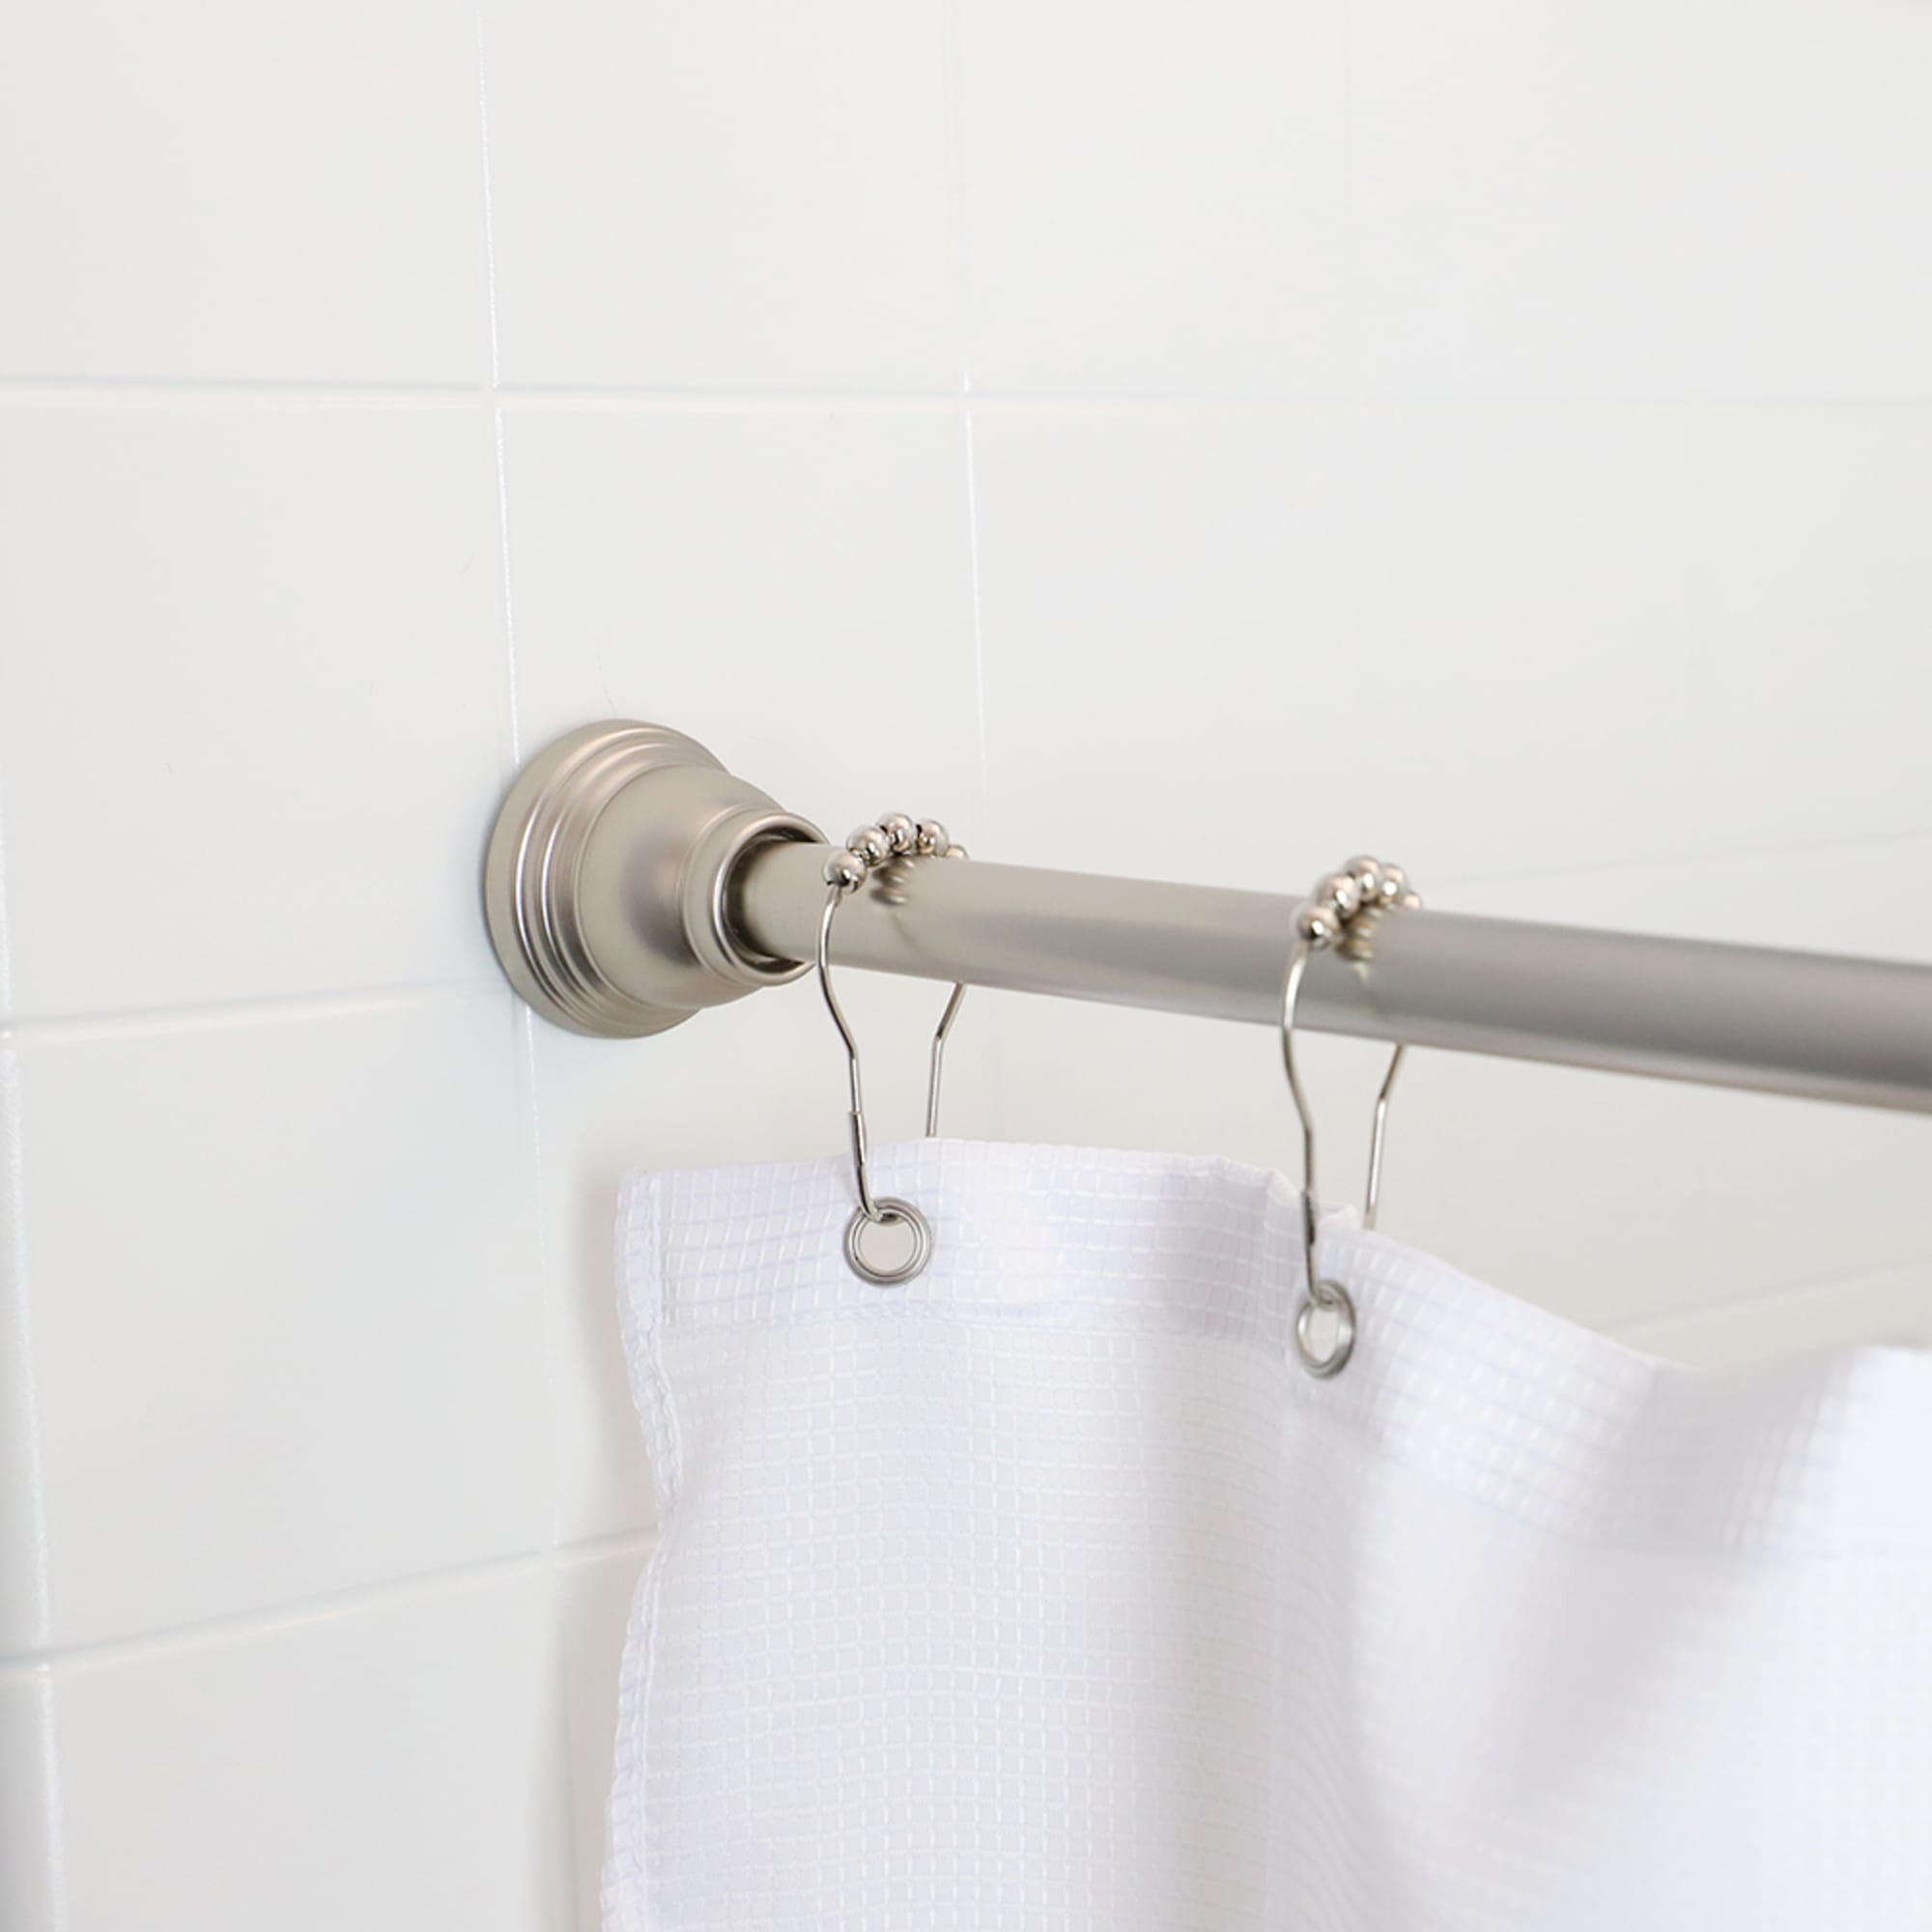 Home Basics Empire 47-72” Adjustable Tension Mounted Straight Steel Shower Curtain Rod, Satin Nickel $12.00 EACH, CASE PACK OF 12